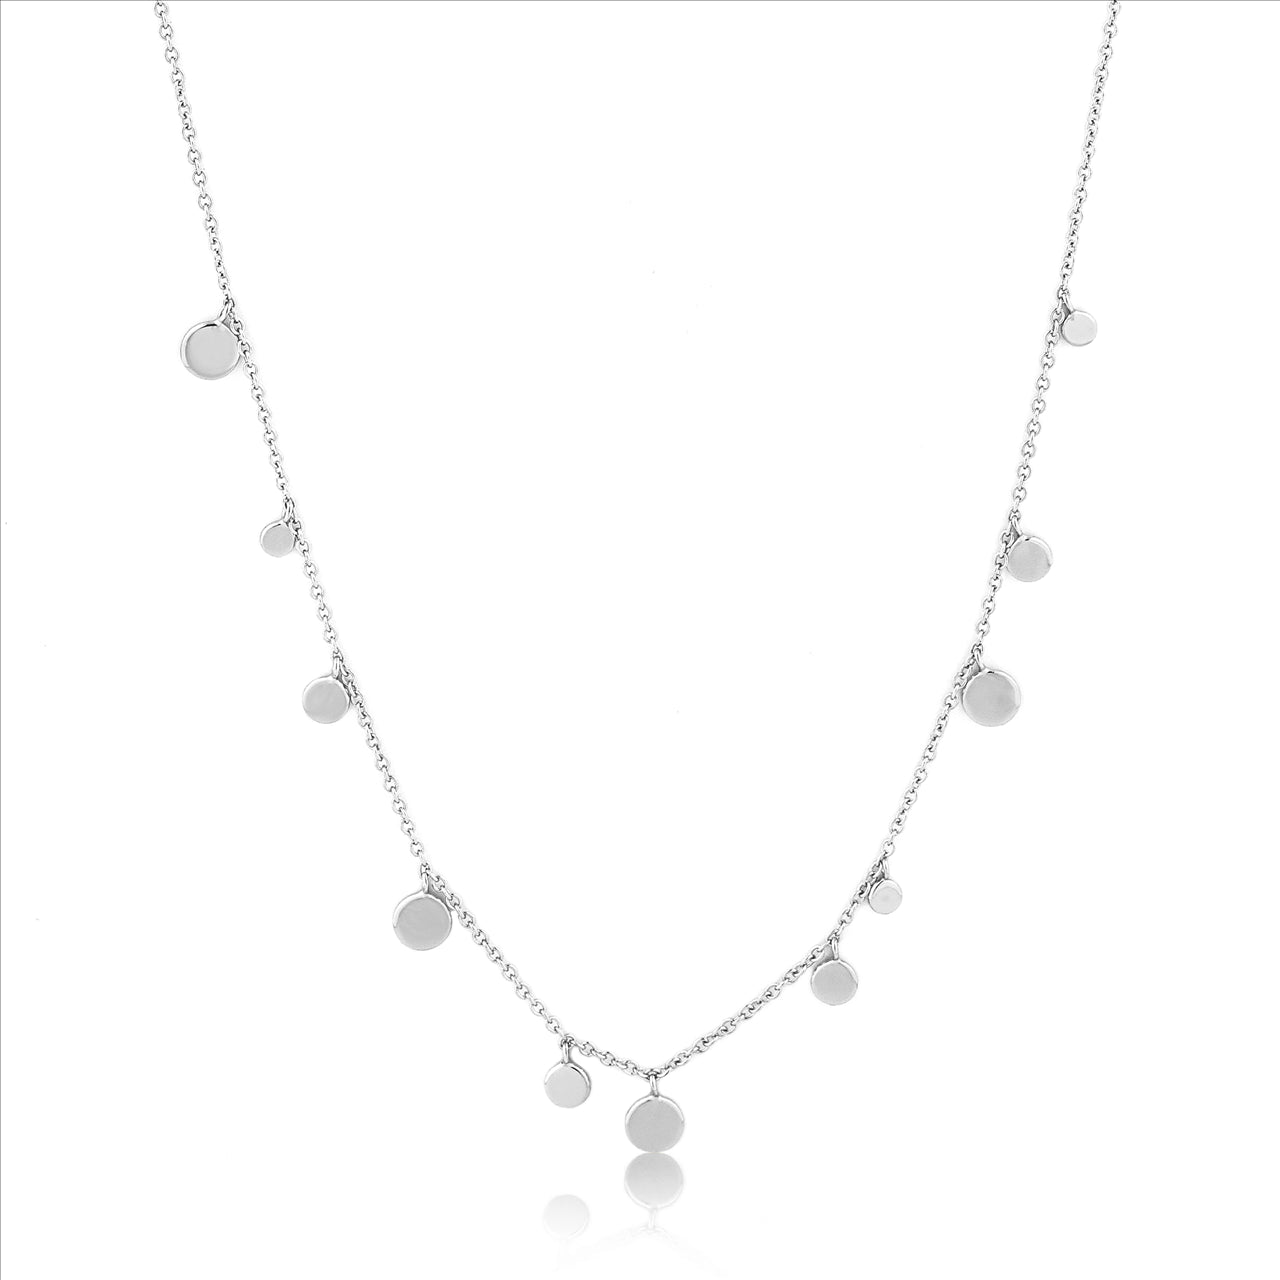 Ania Haie Silver Geometry Mixed Discs Necklace